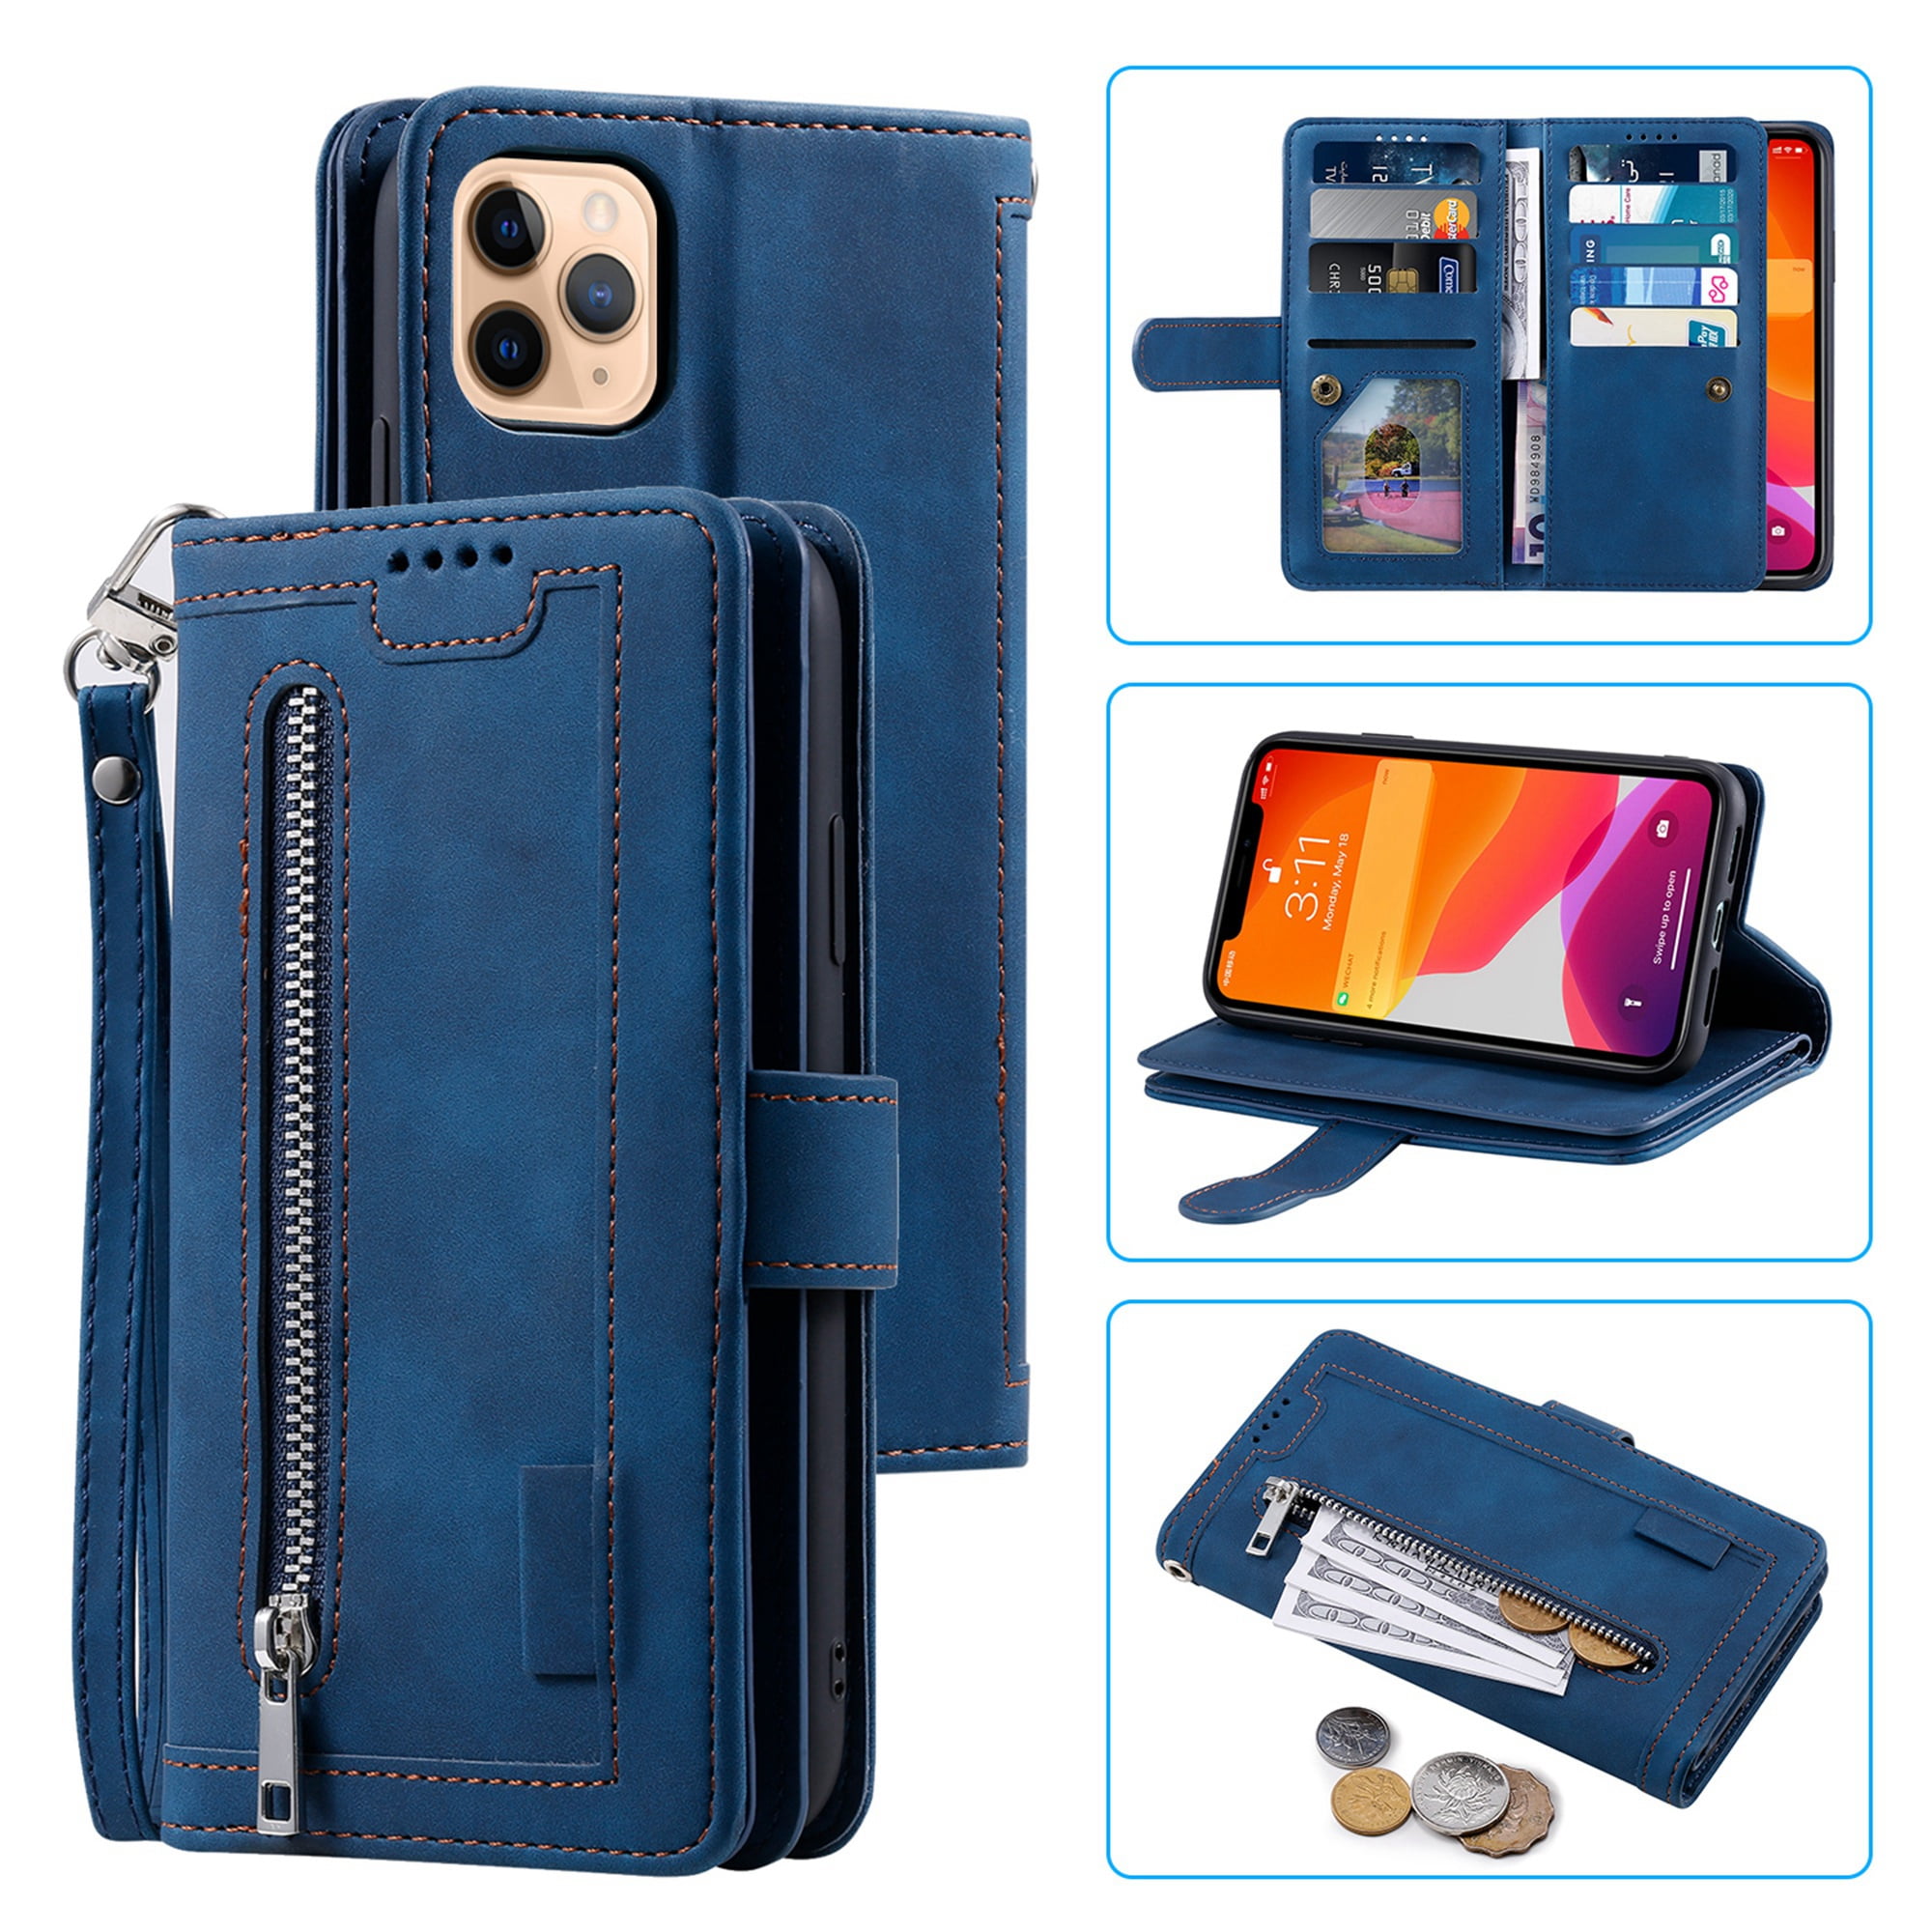 Dteck 9 Card Slots Wallet Case for Apple iPhone 12 Pro Max 6.7-inch